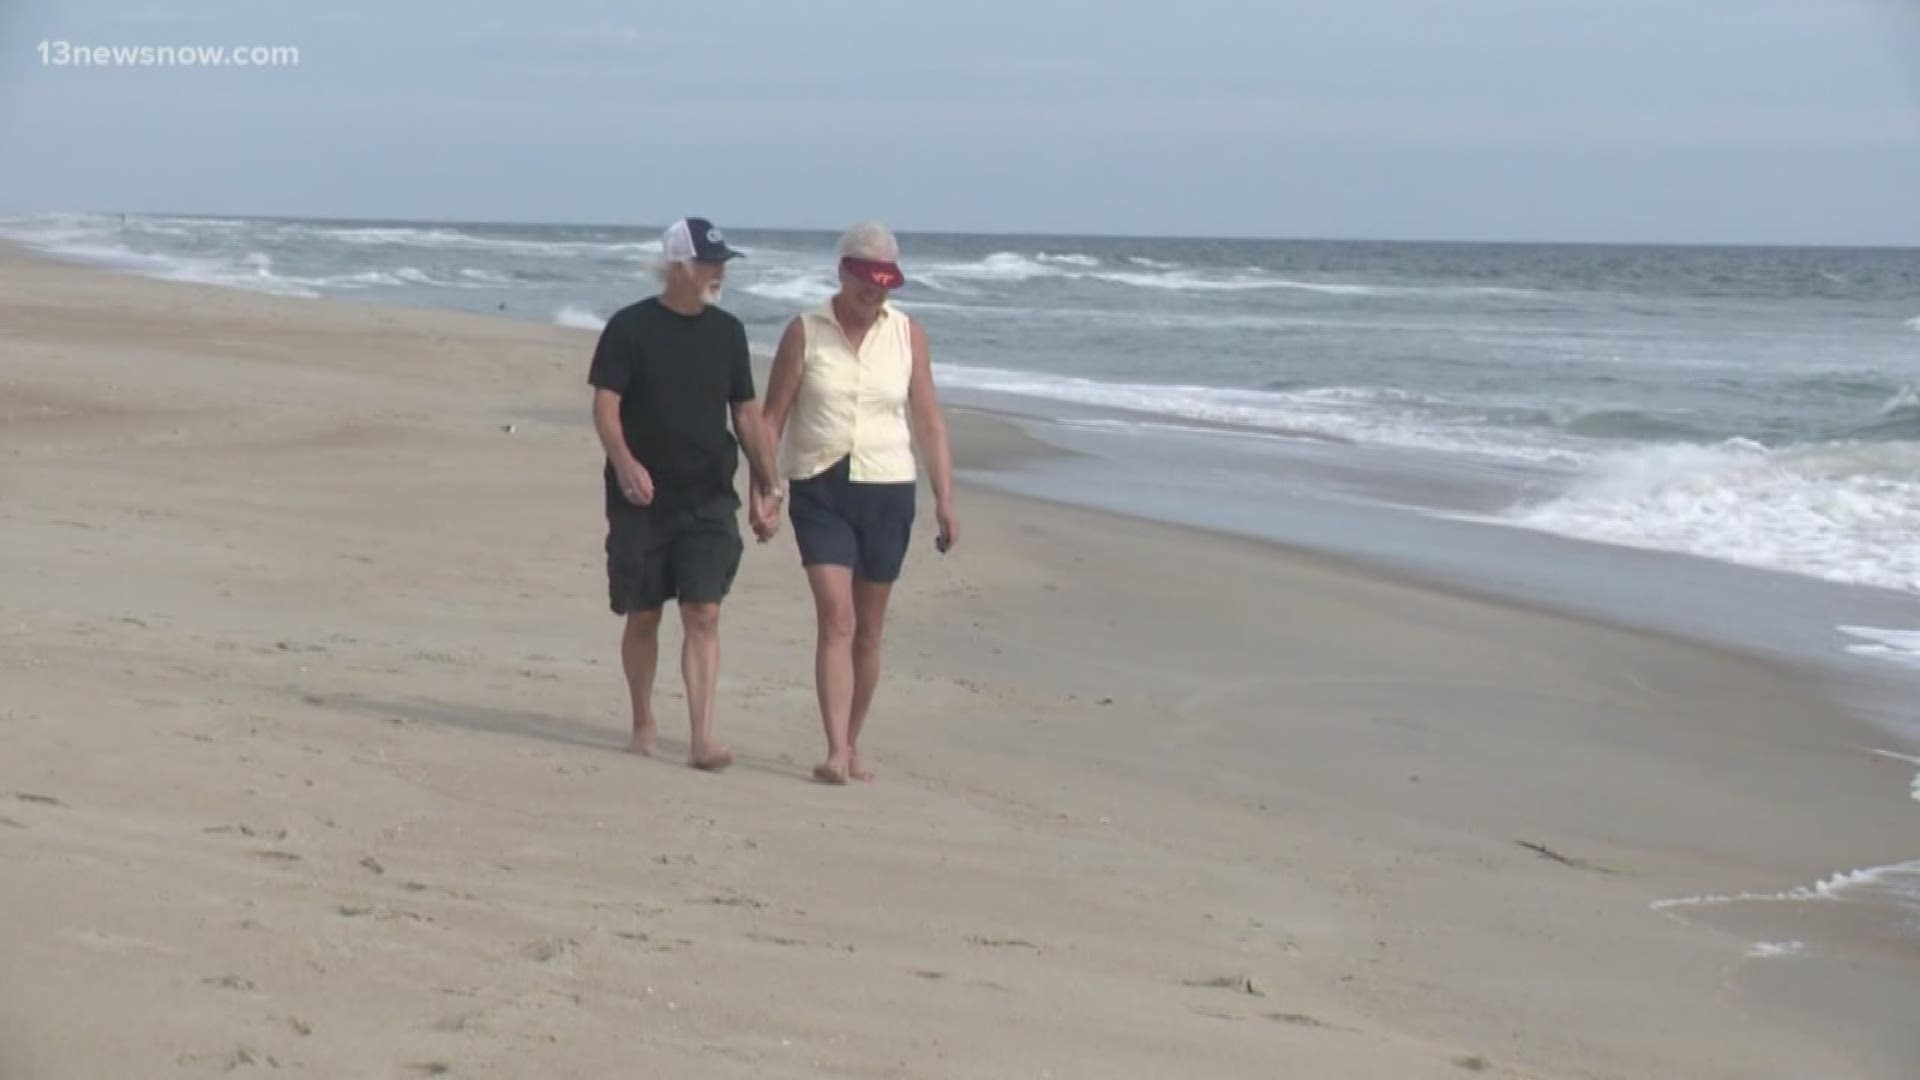 Between 50 years of marriage, a handful of grandchildren and 15 years in the Outer Banks, they said they don’t believe Hurricane Dorian will be a big deal.